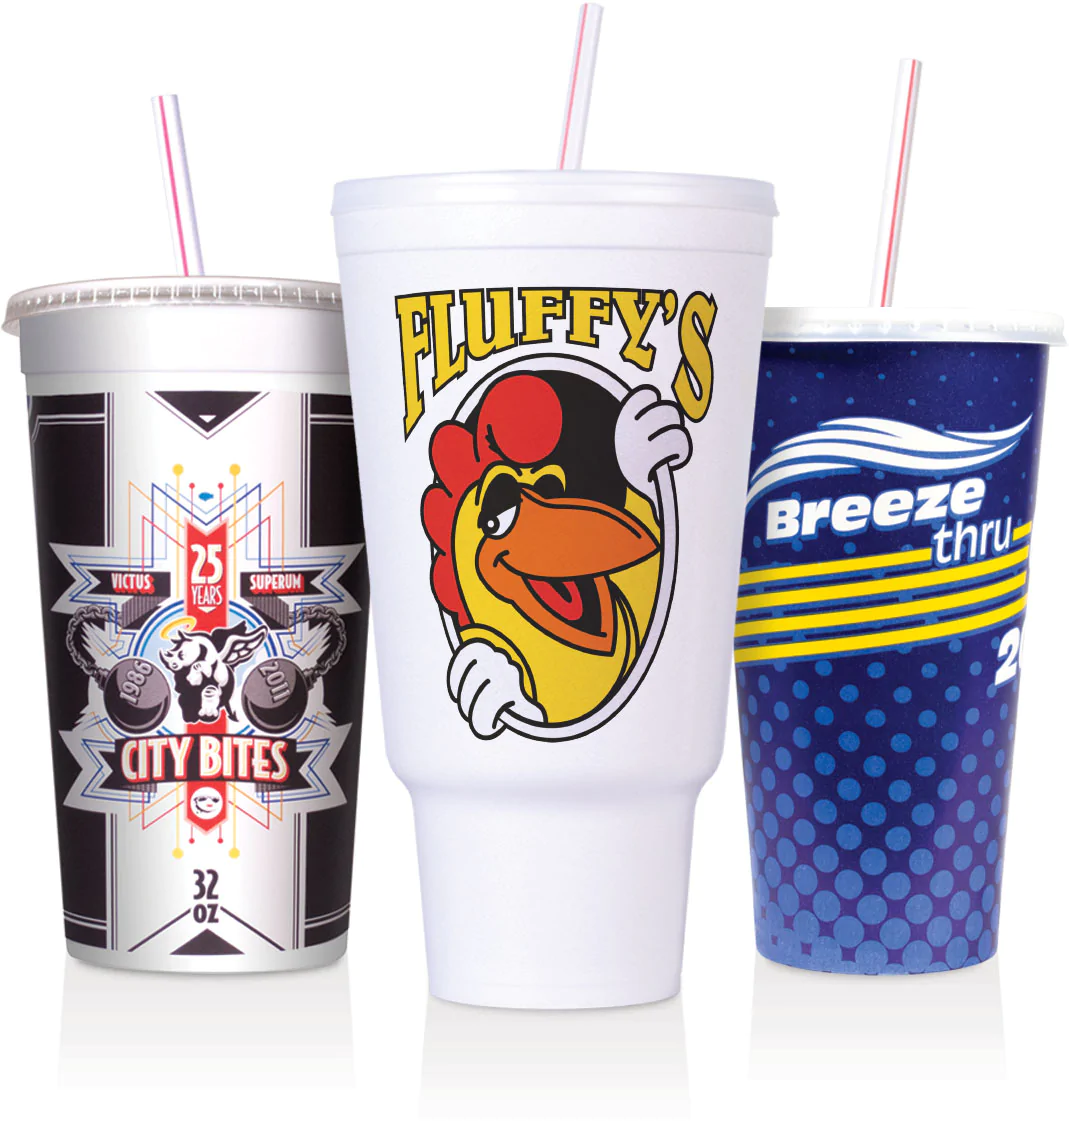 IMG - Custom Cold Cups - White